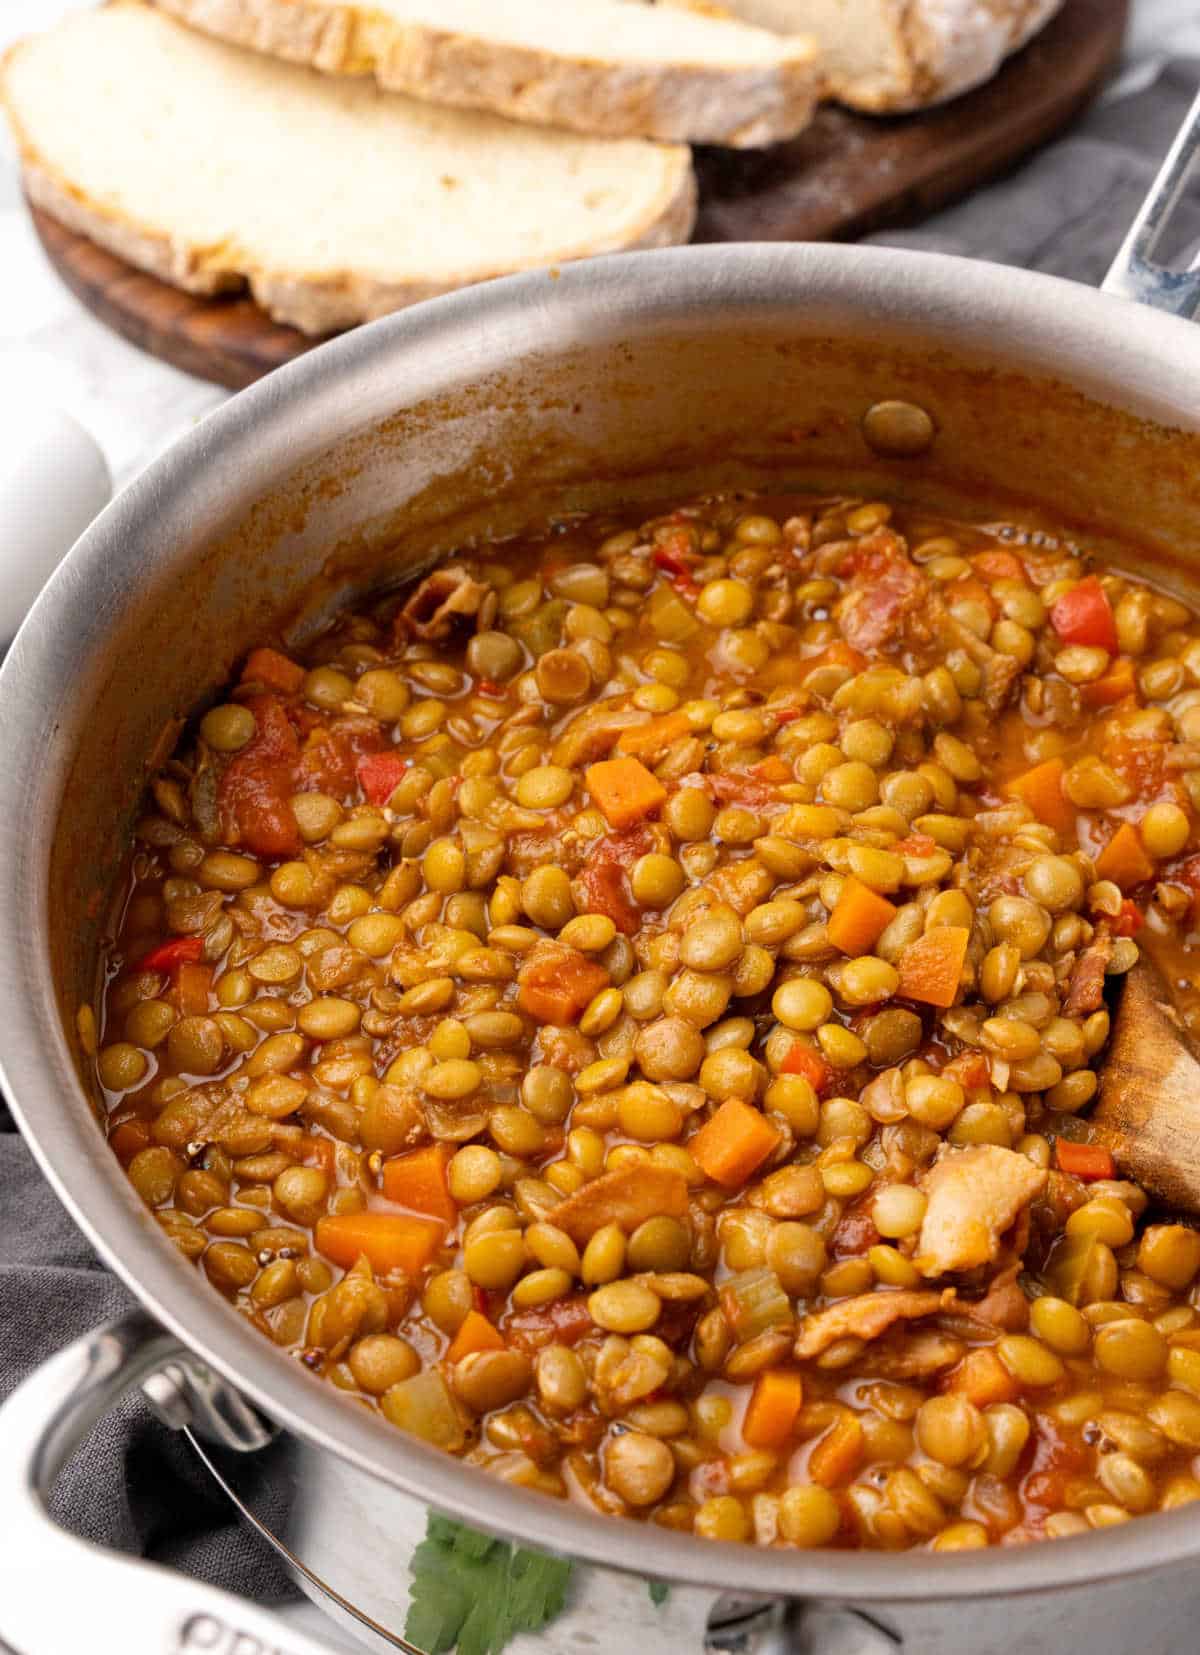 Large metal pot with lentil stew. Bread slices in the background.